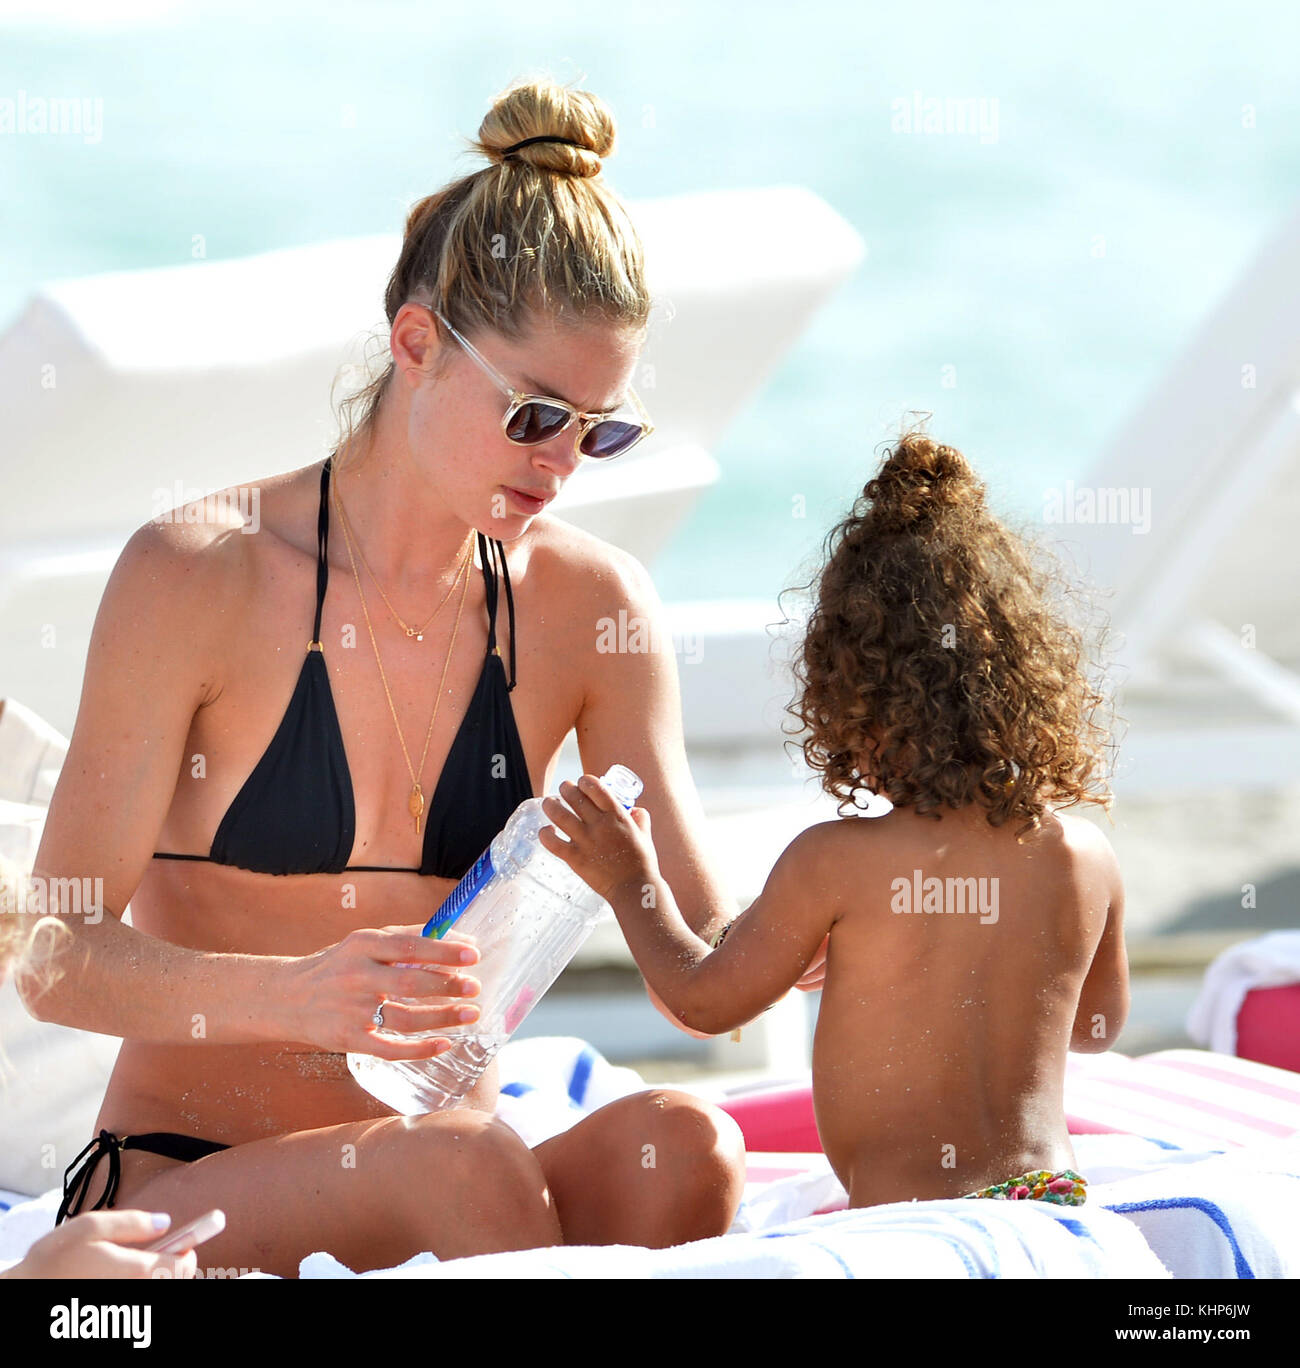 vervormen Opblazen tuberculose MIAMI, FL - JANUARY 03: Doutzen Kroes the former Victoria's Secret Angel  wearing a skimpy black triangle string bikini was joined by her adorable  children, son Phyllon, five, and daughter Myllena, two